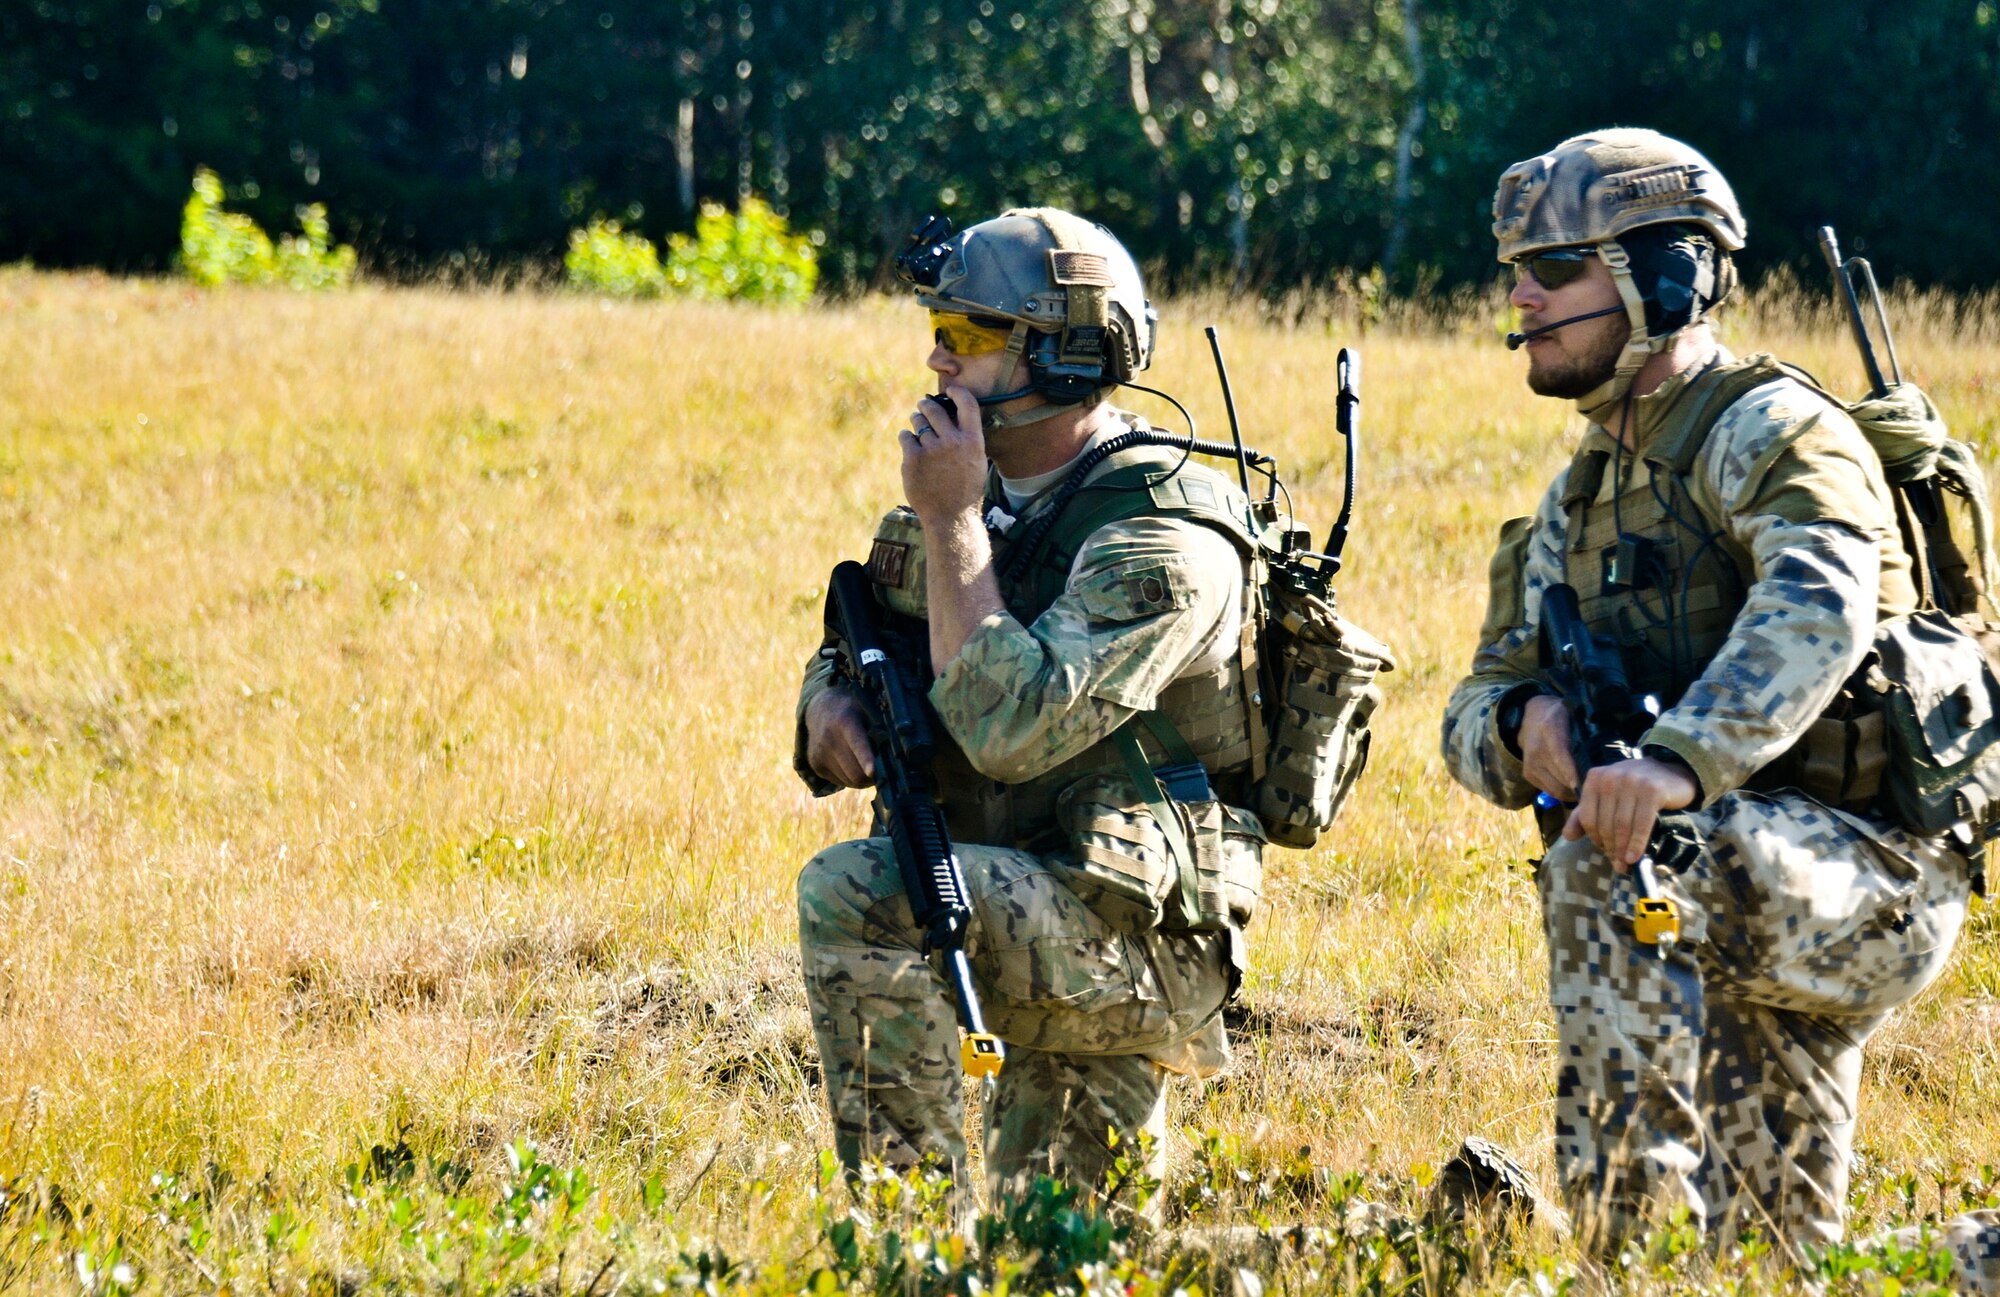 U.S. Air Force Master Sgt. John M. Oliver (left), tactical air control party specialist with the 169th Air Support Operations Squadron, and Latvian 1st Sgt. Modris Circenis, TACP with the Latvian National Armed Forces, communicate with a team flanking an enemy position during a reconnaissance mission at Operation Northern Strike in Grayling Air Gunnery Range, Grayling, Mich., Aug. 14, 2014. Northern Strike was a 3-week-long exercise led by the National Guard that demonstrated the combined power of joint and multinational air and ground forces. TACPs with the Air National Guard’s 169th ASOS from Peoria, Ill., and more than 5,000 other armed forces members from 12 states and two coalition nations participated in the combat training. (U.S. Air National Guard photo by Staff Sgt. Lealan Buehrer/Released)